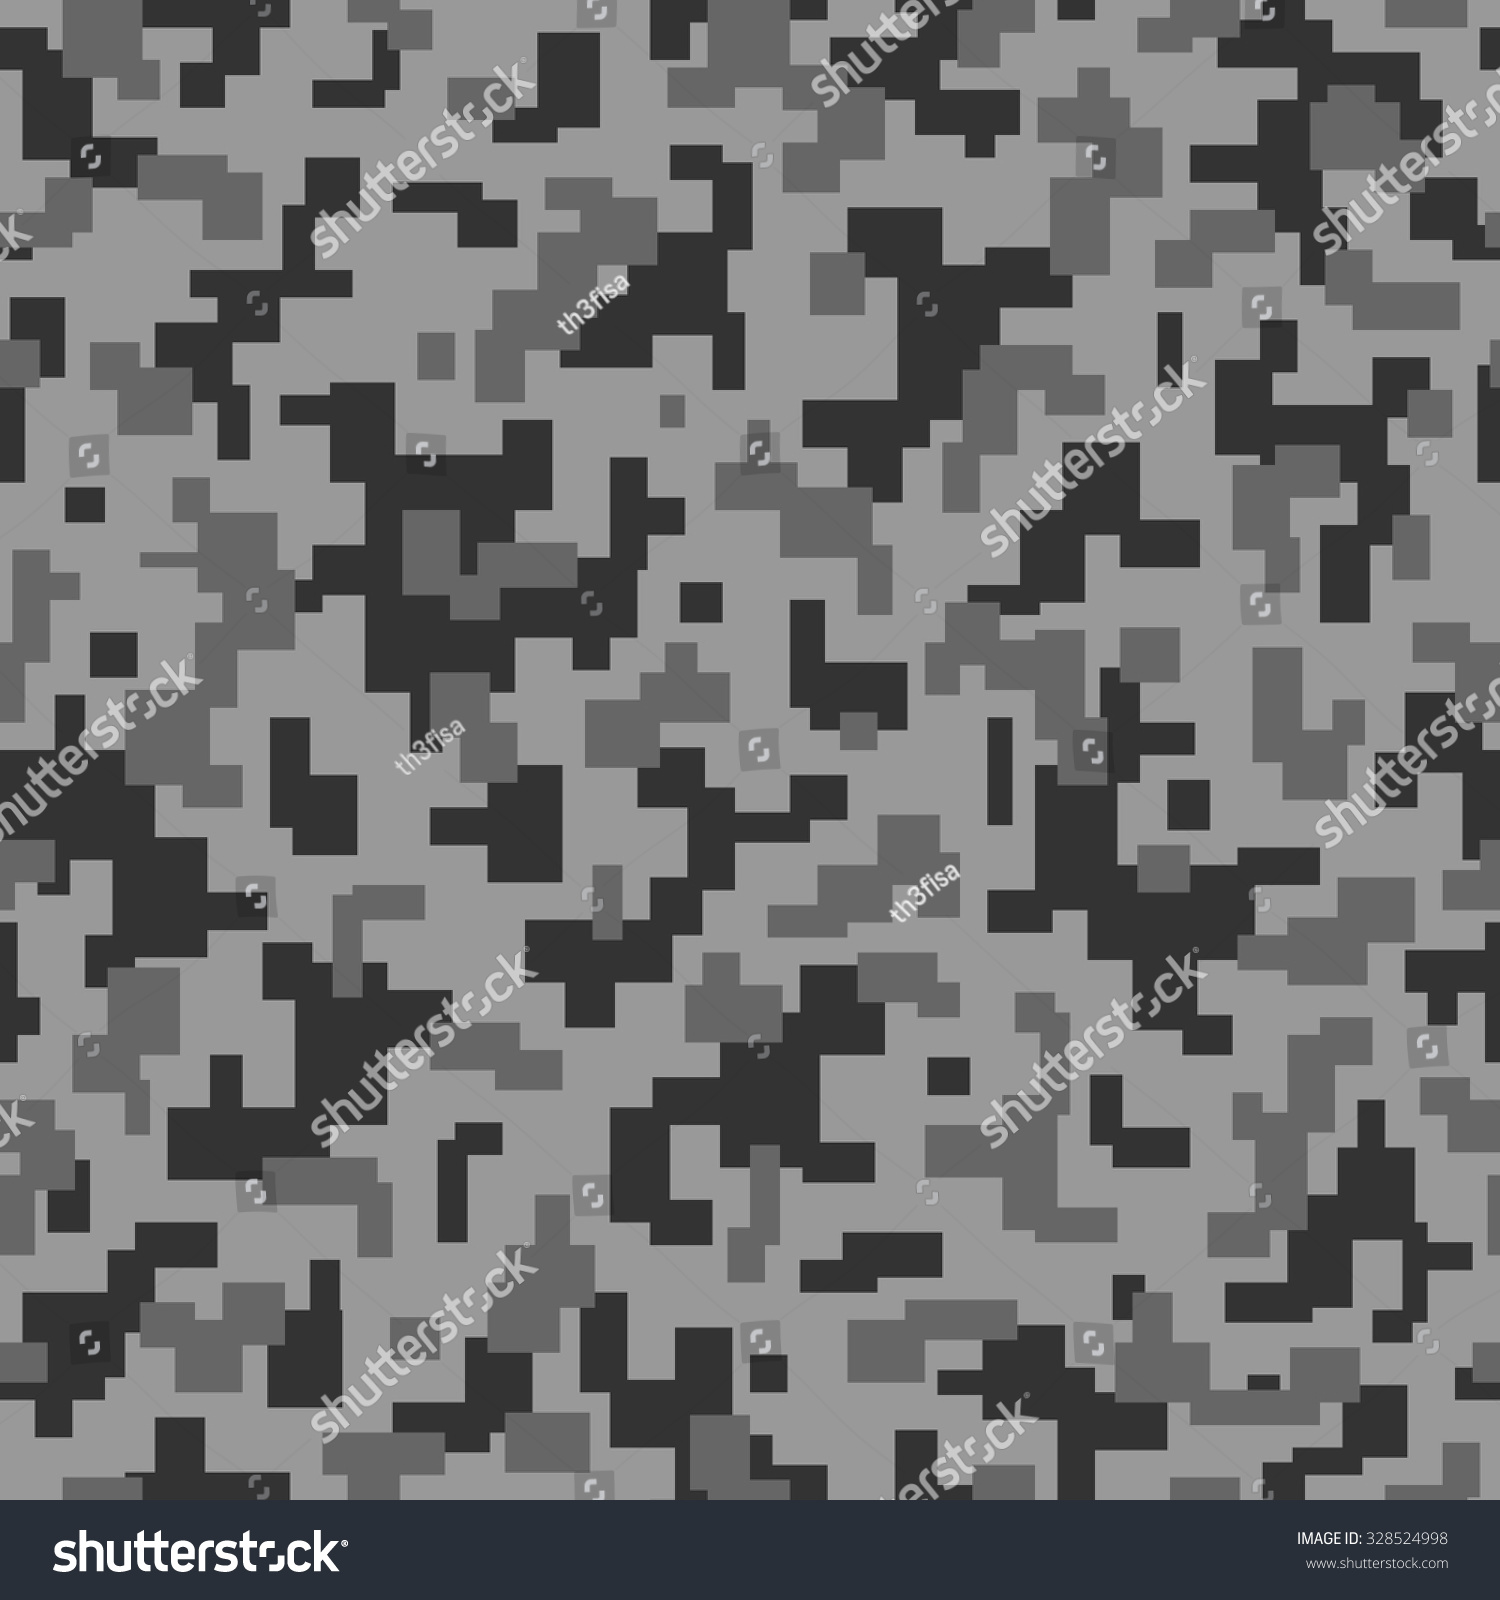 Vector Repeat Pixel Camouflage Texture With Gray Colors - 328524998 ...